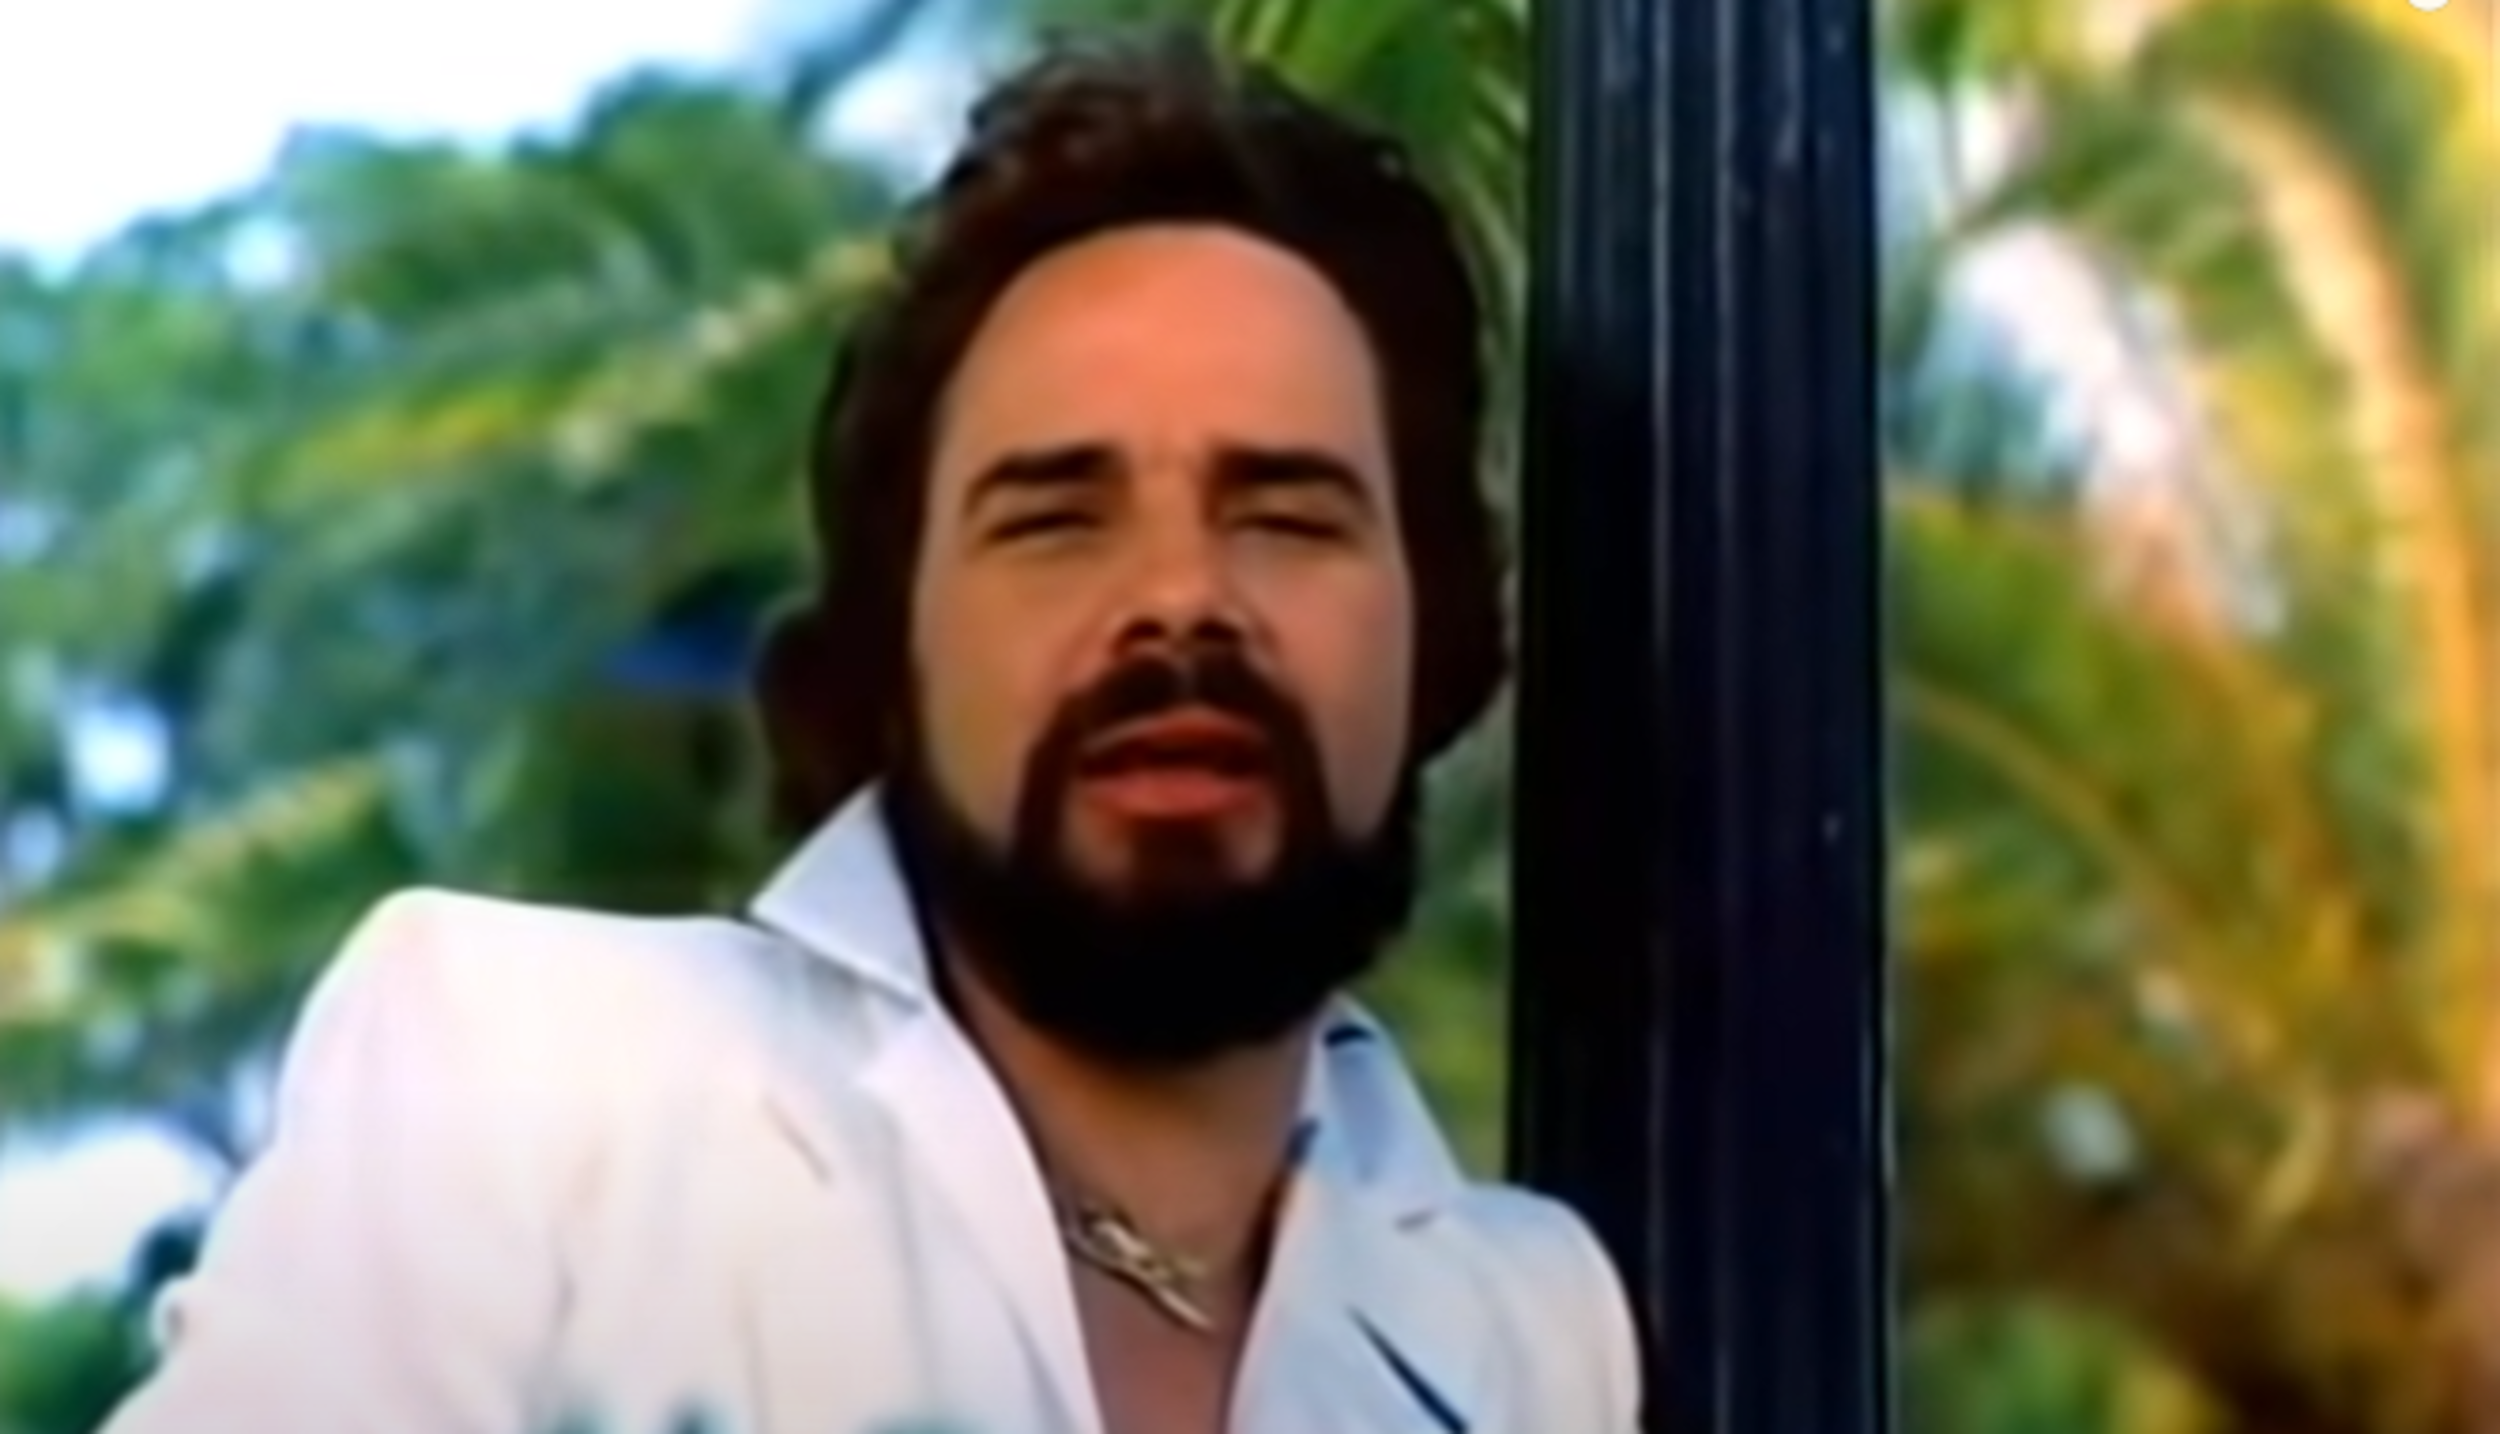 <p>Yacht rock and one-hit wonders seem to go hand-in-hand. Higgins scored one in the early 1980s with this number that reached No. 8 on the <em>Billboard</em> Hot 100. The Florida native was inspired to write this <a href="https://www.youtube.com/watch?v=Ru2tsT32pHA">song about trying to avoid a romantic breakup</a> by the 1948 movie of the same name, starring Humphrey Bogart and Lauren Bacall, who are referenced in the tune. Though Higgins never enjoyed the same individual success as a musician, the song has had a solid shelf life and remains a definitive moment in the yacht rock genre.</p><p>You may also like: <a href='https://www.yardbarker.com/entertainment/articles/20_of_the_greatest_love_songs_in_country_music_history/s1__35580848'>20 of the greatest love songs in country music history</a></p>